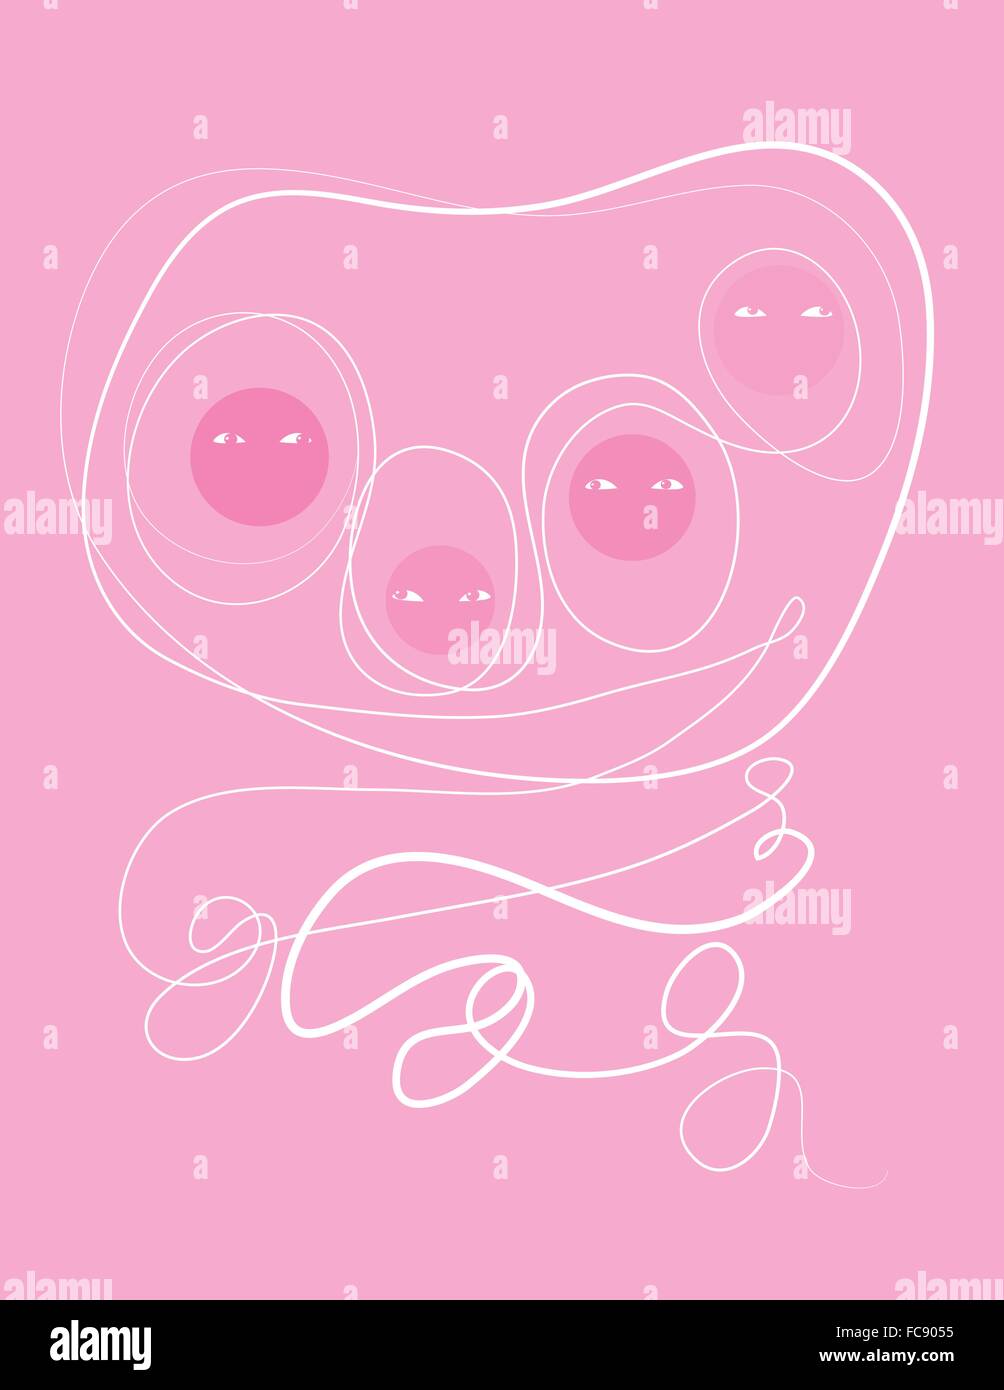 Family of four bound together with white flourishing lines on pink. Stock Vector